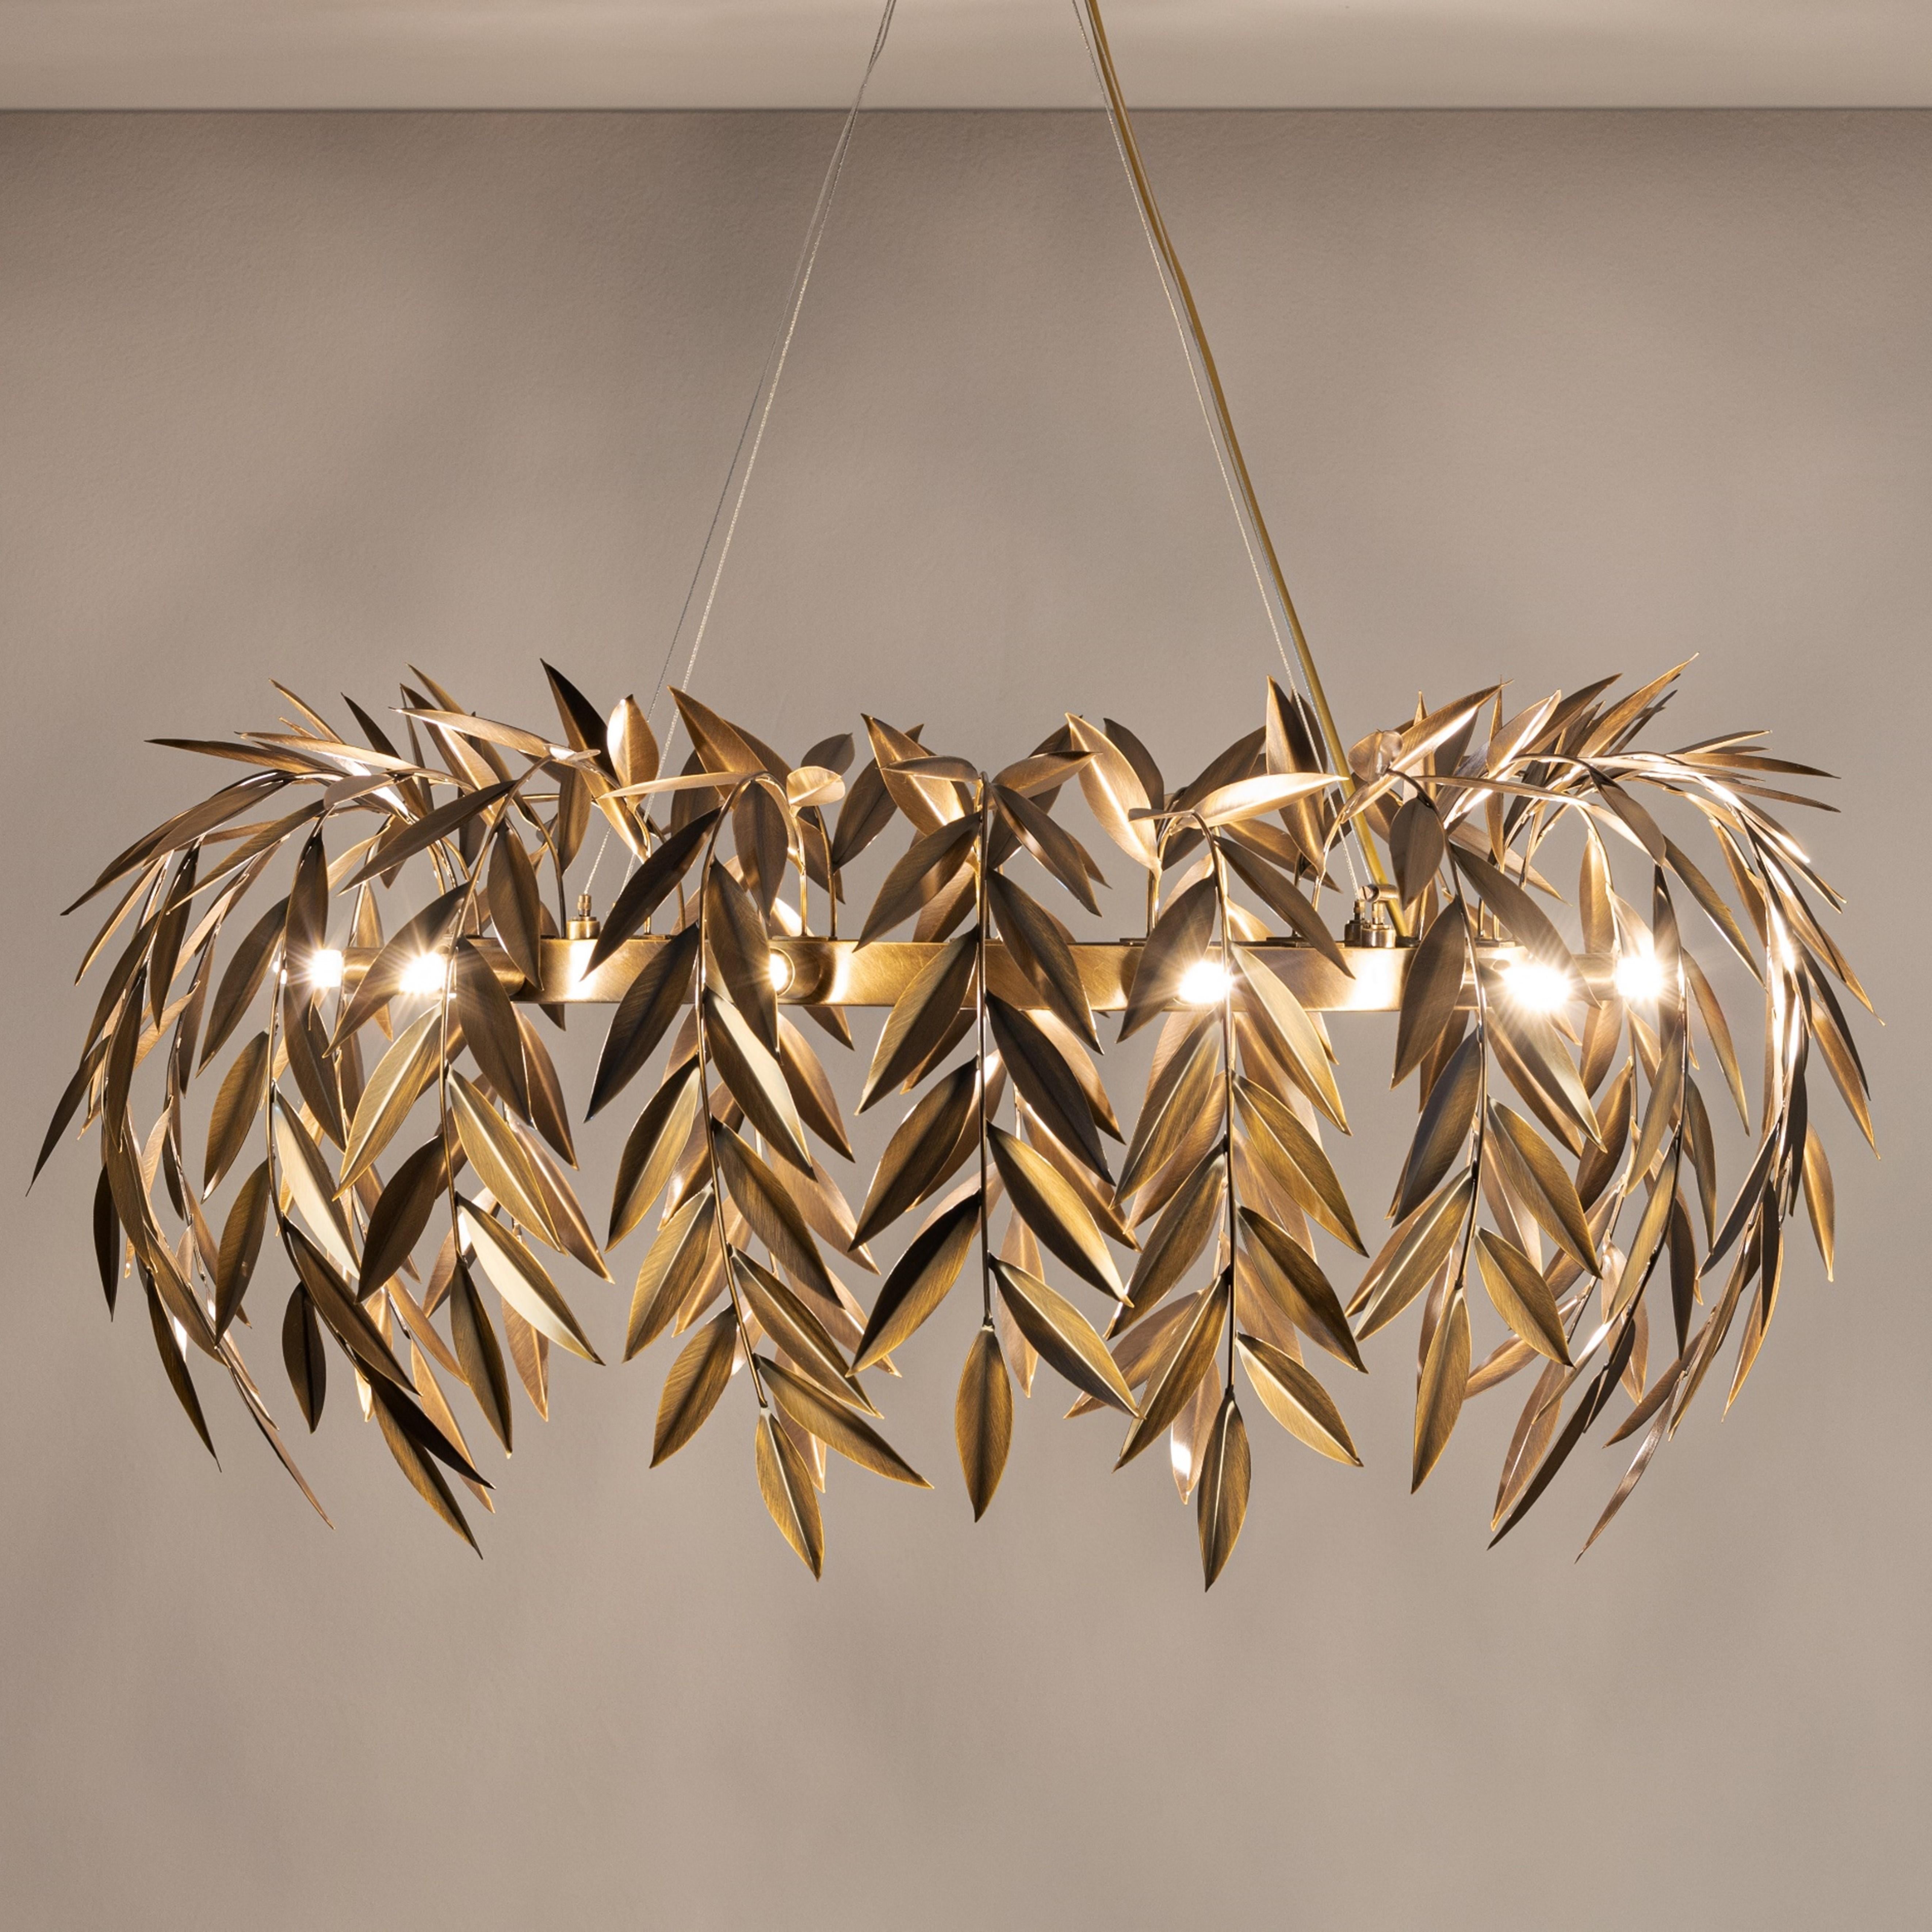 Portuguese Azores Chandelier, Oxidized Brushed Brass, InsidherLand by Joana Santos Barbosa For Sale